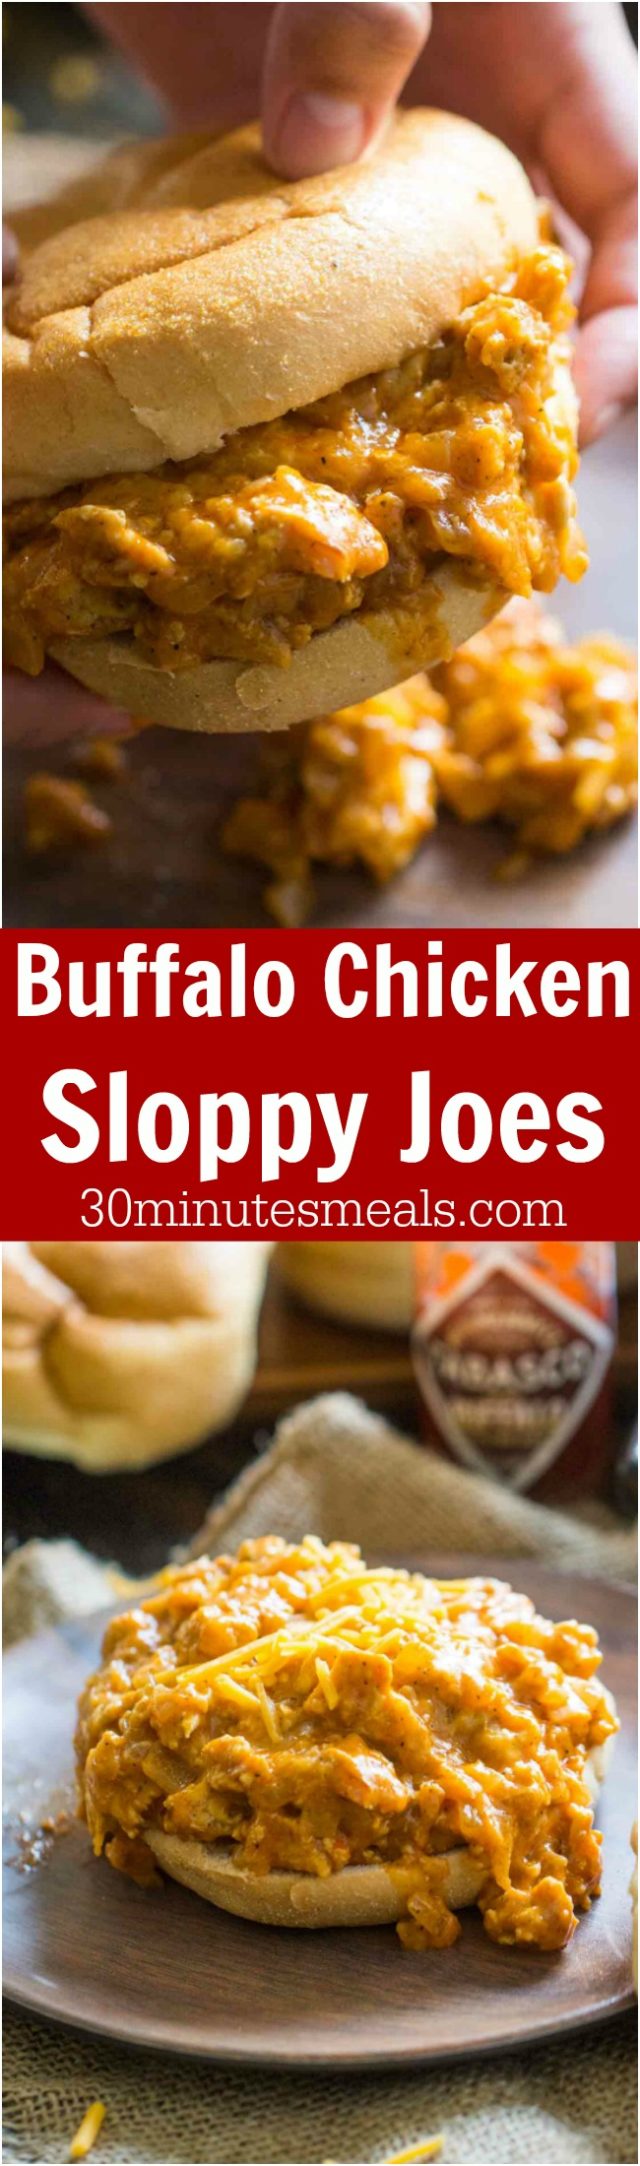 Buffalo Chicken Sloppy Joes [Video] - 30 minutes meals